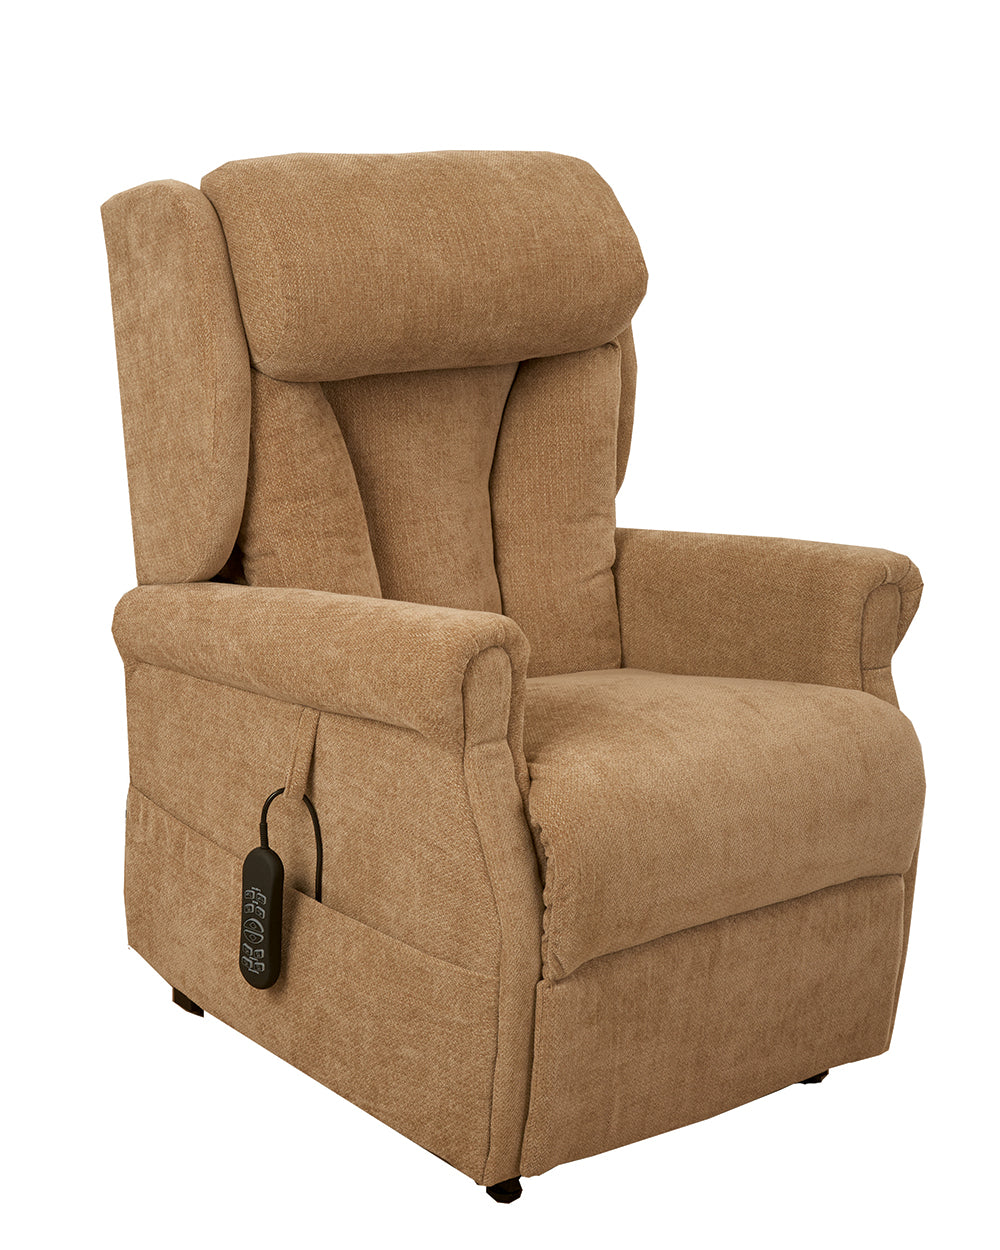 Quantcock rise and recline chair sandstone